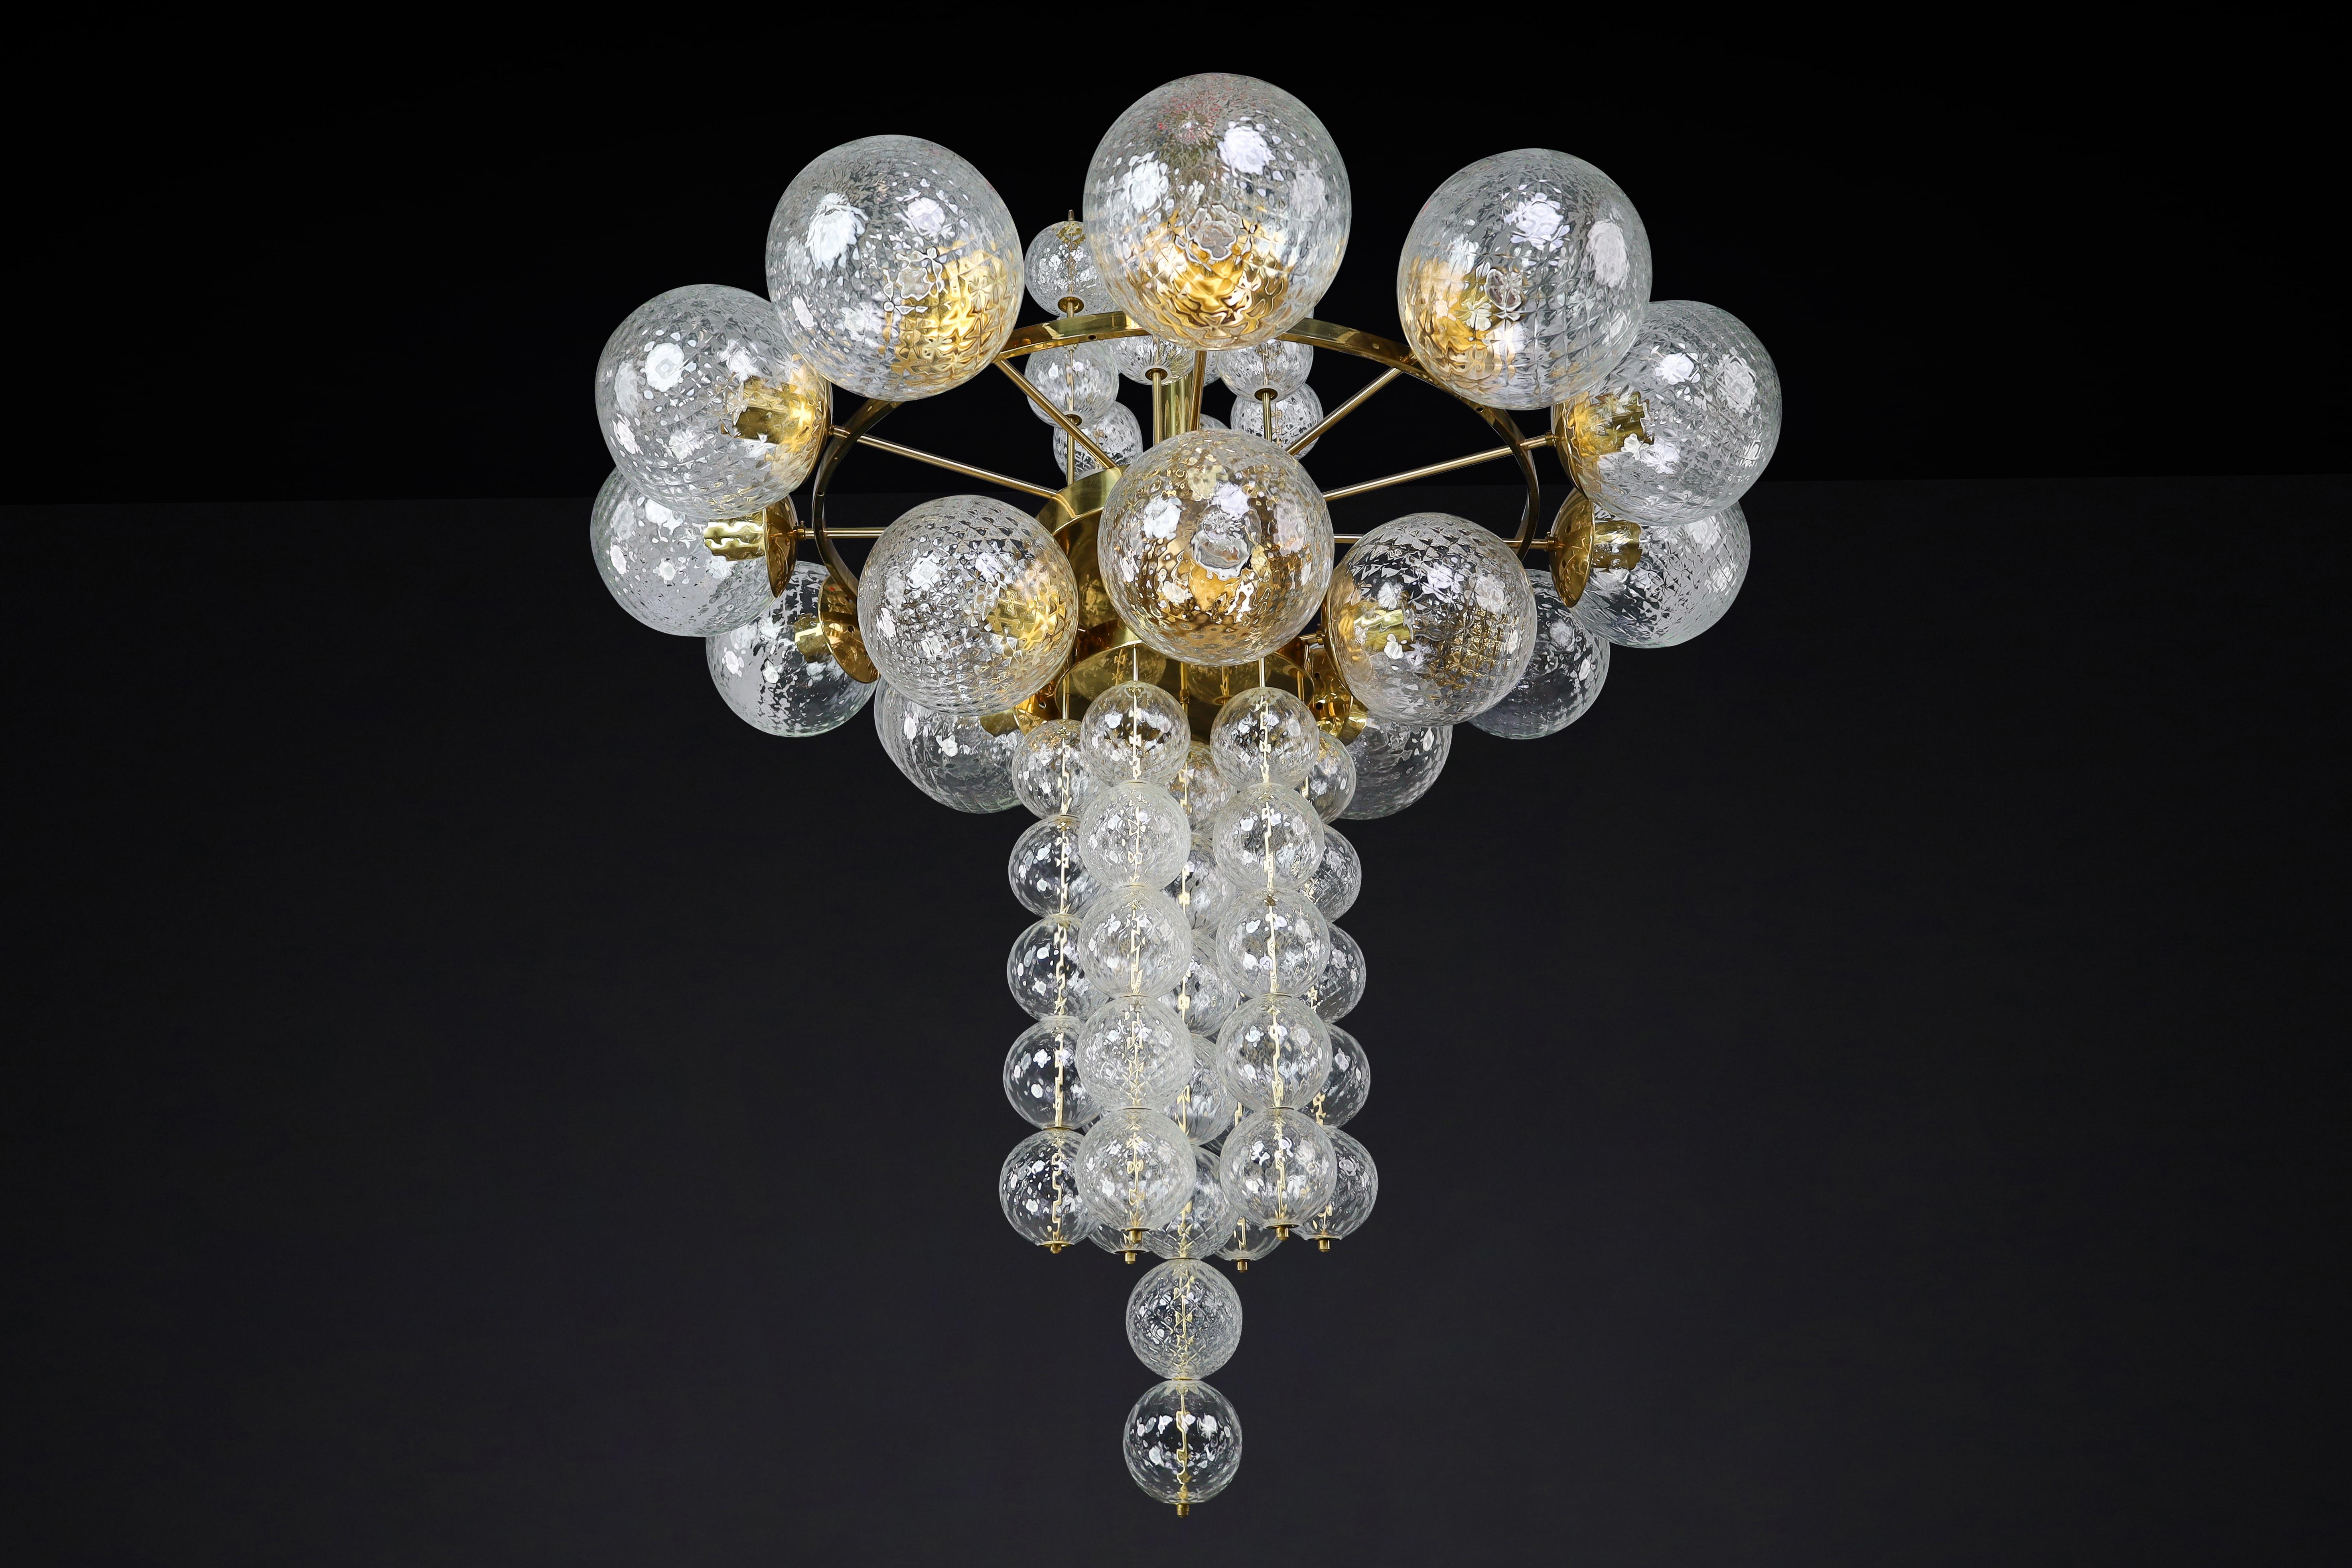 Large Chandelier with brass fixture and hand-blowed glass globes by Preciosa Cz. In Good Condition For Sale In Almelo, NL